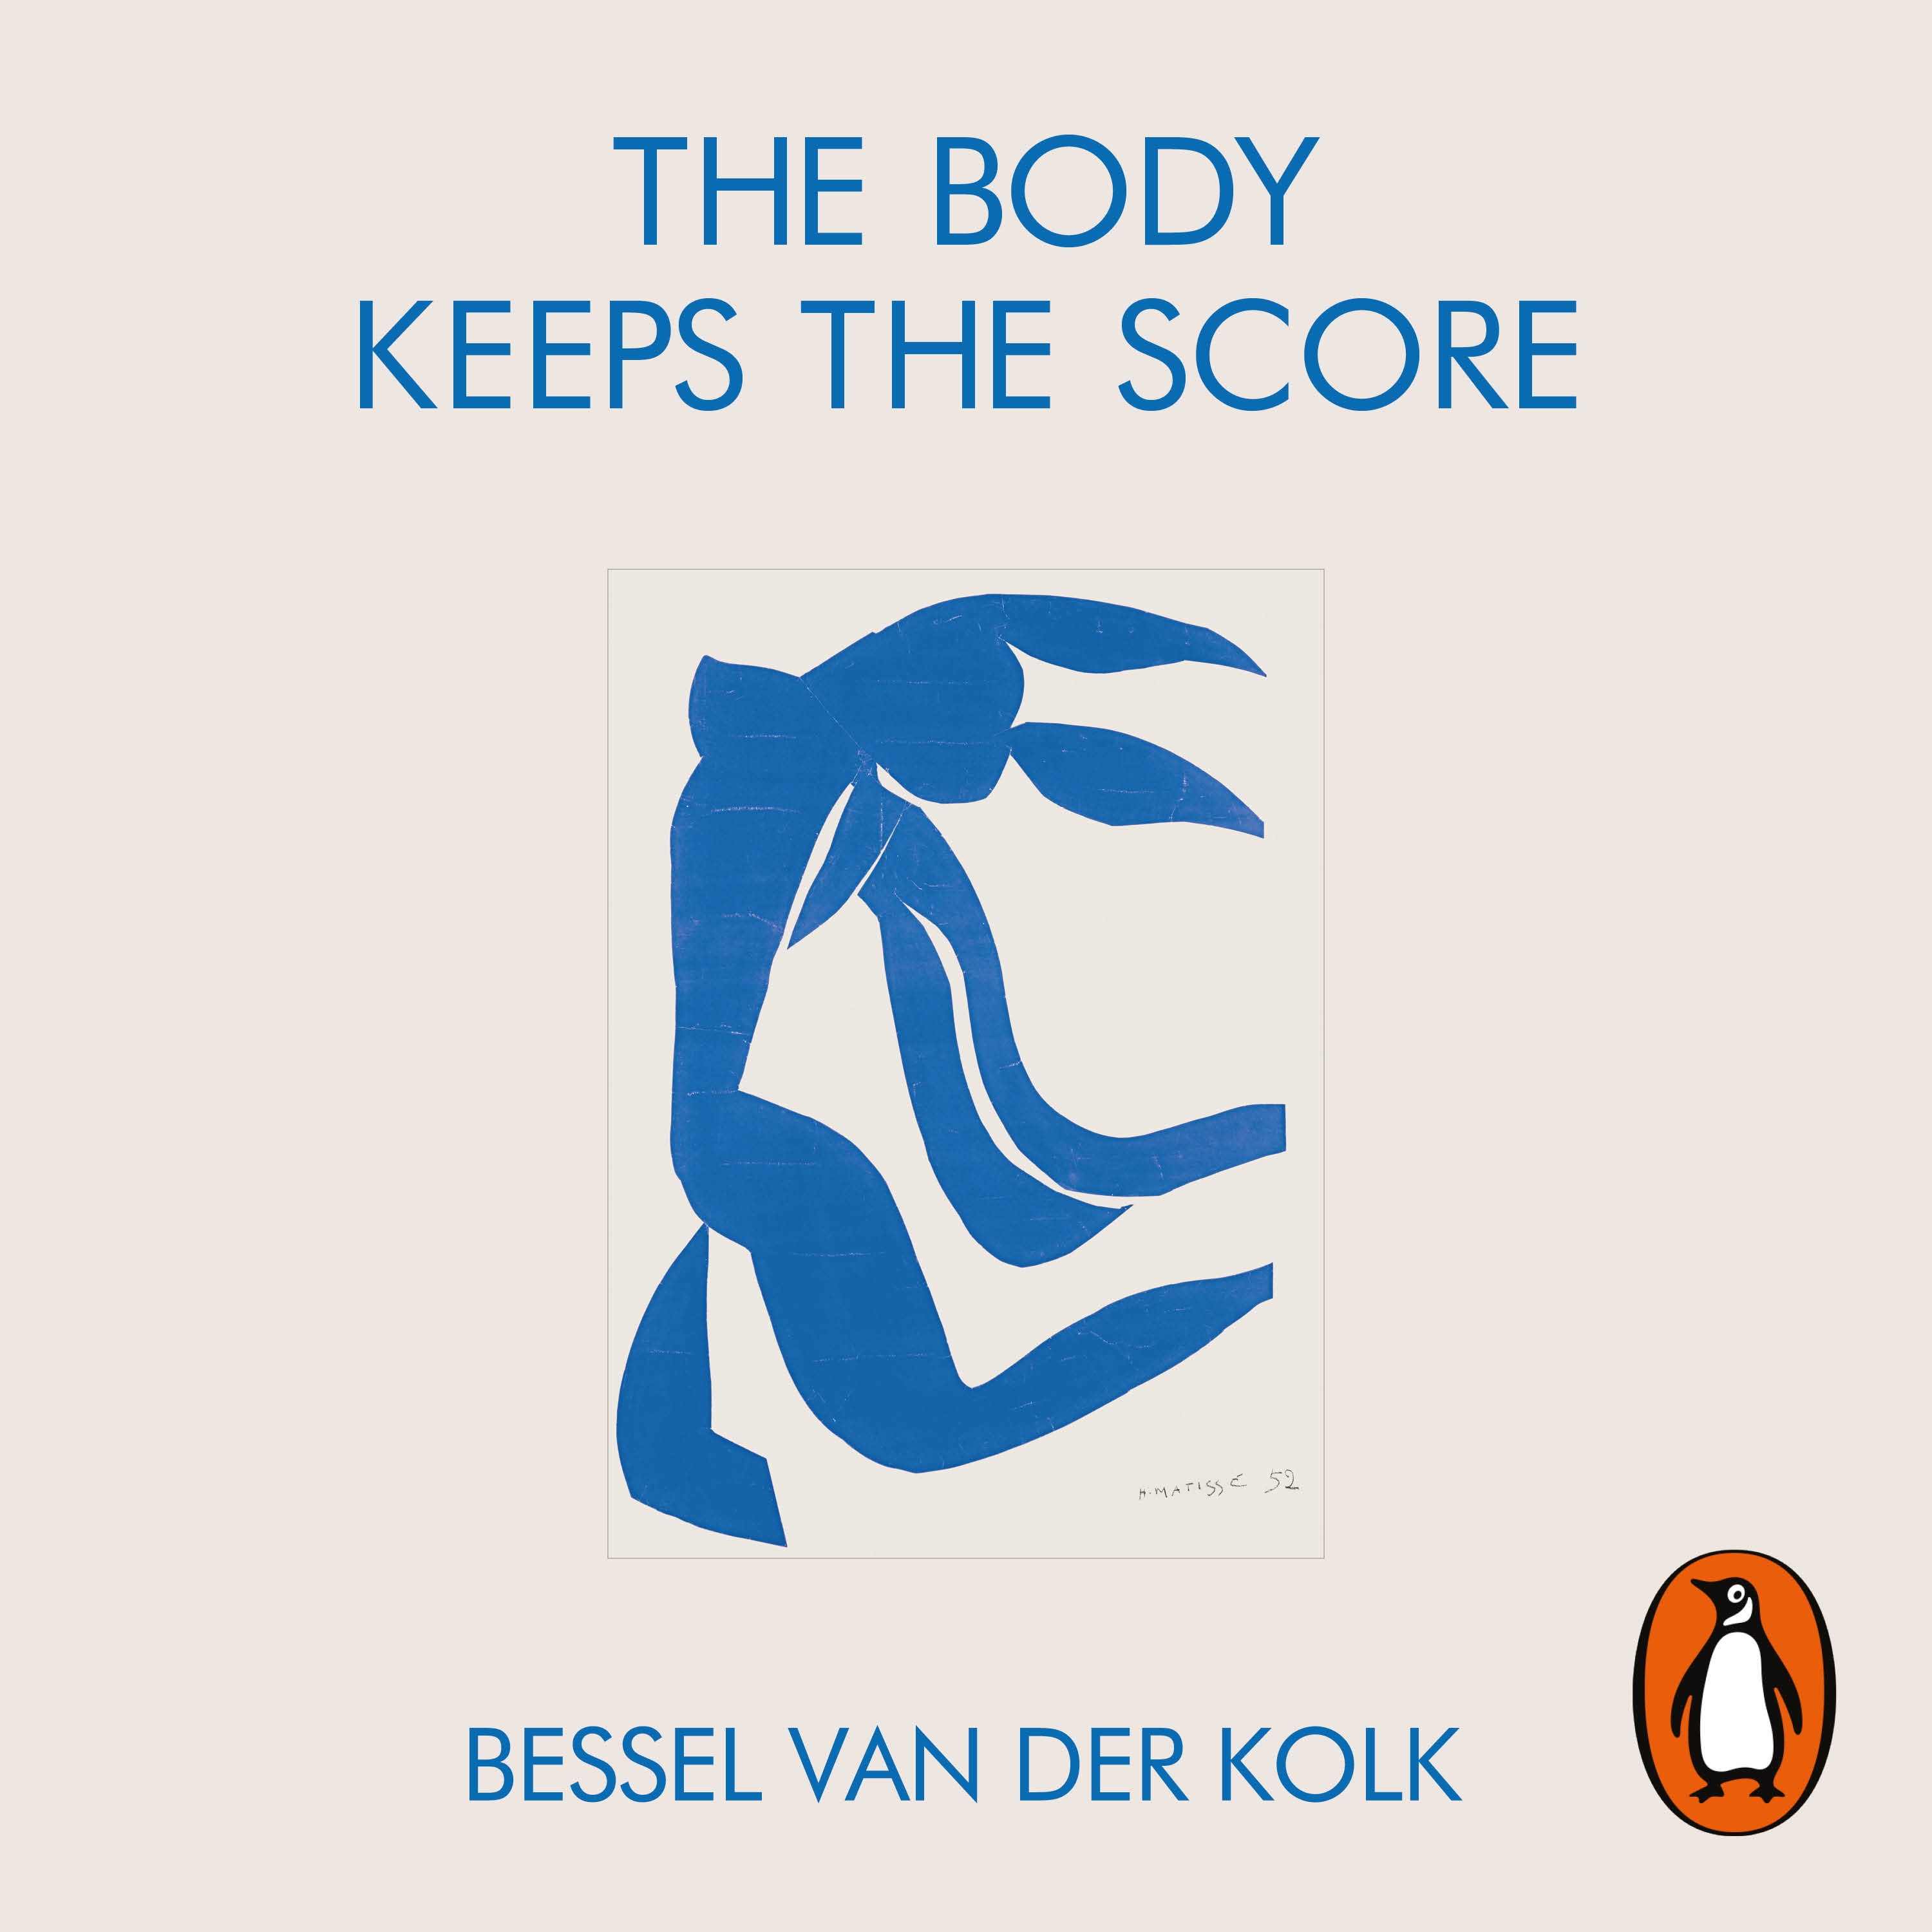 Audiobook image for The Body Keeps the Score: Cream background with an abstract blue silhouette of a person. The title is in blue at the top, and the author's name at the bottom.